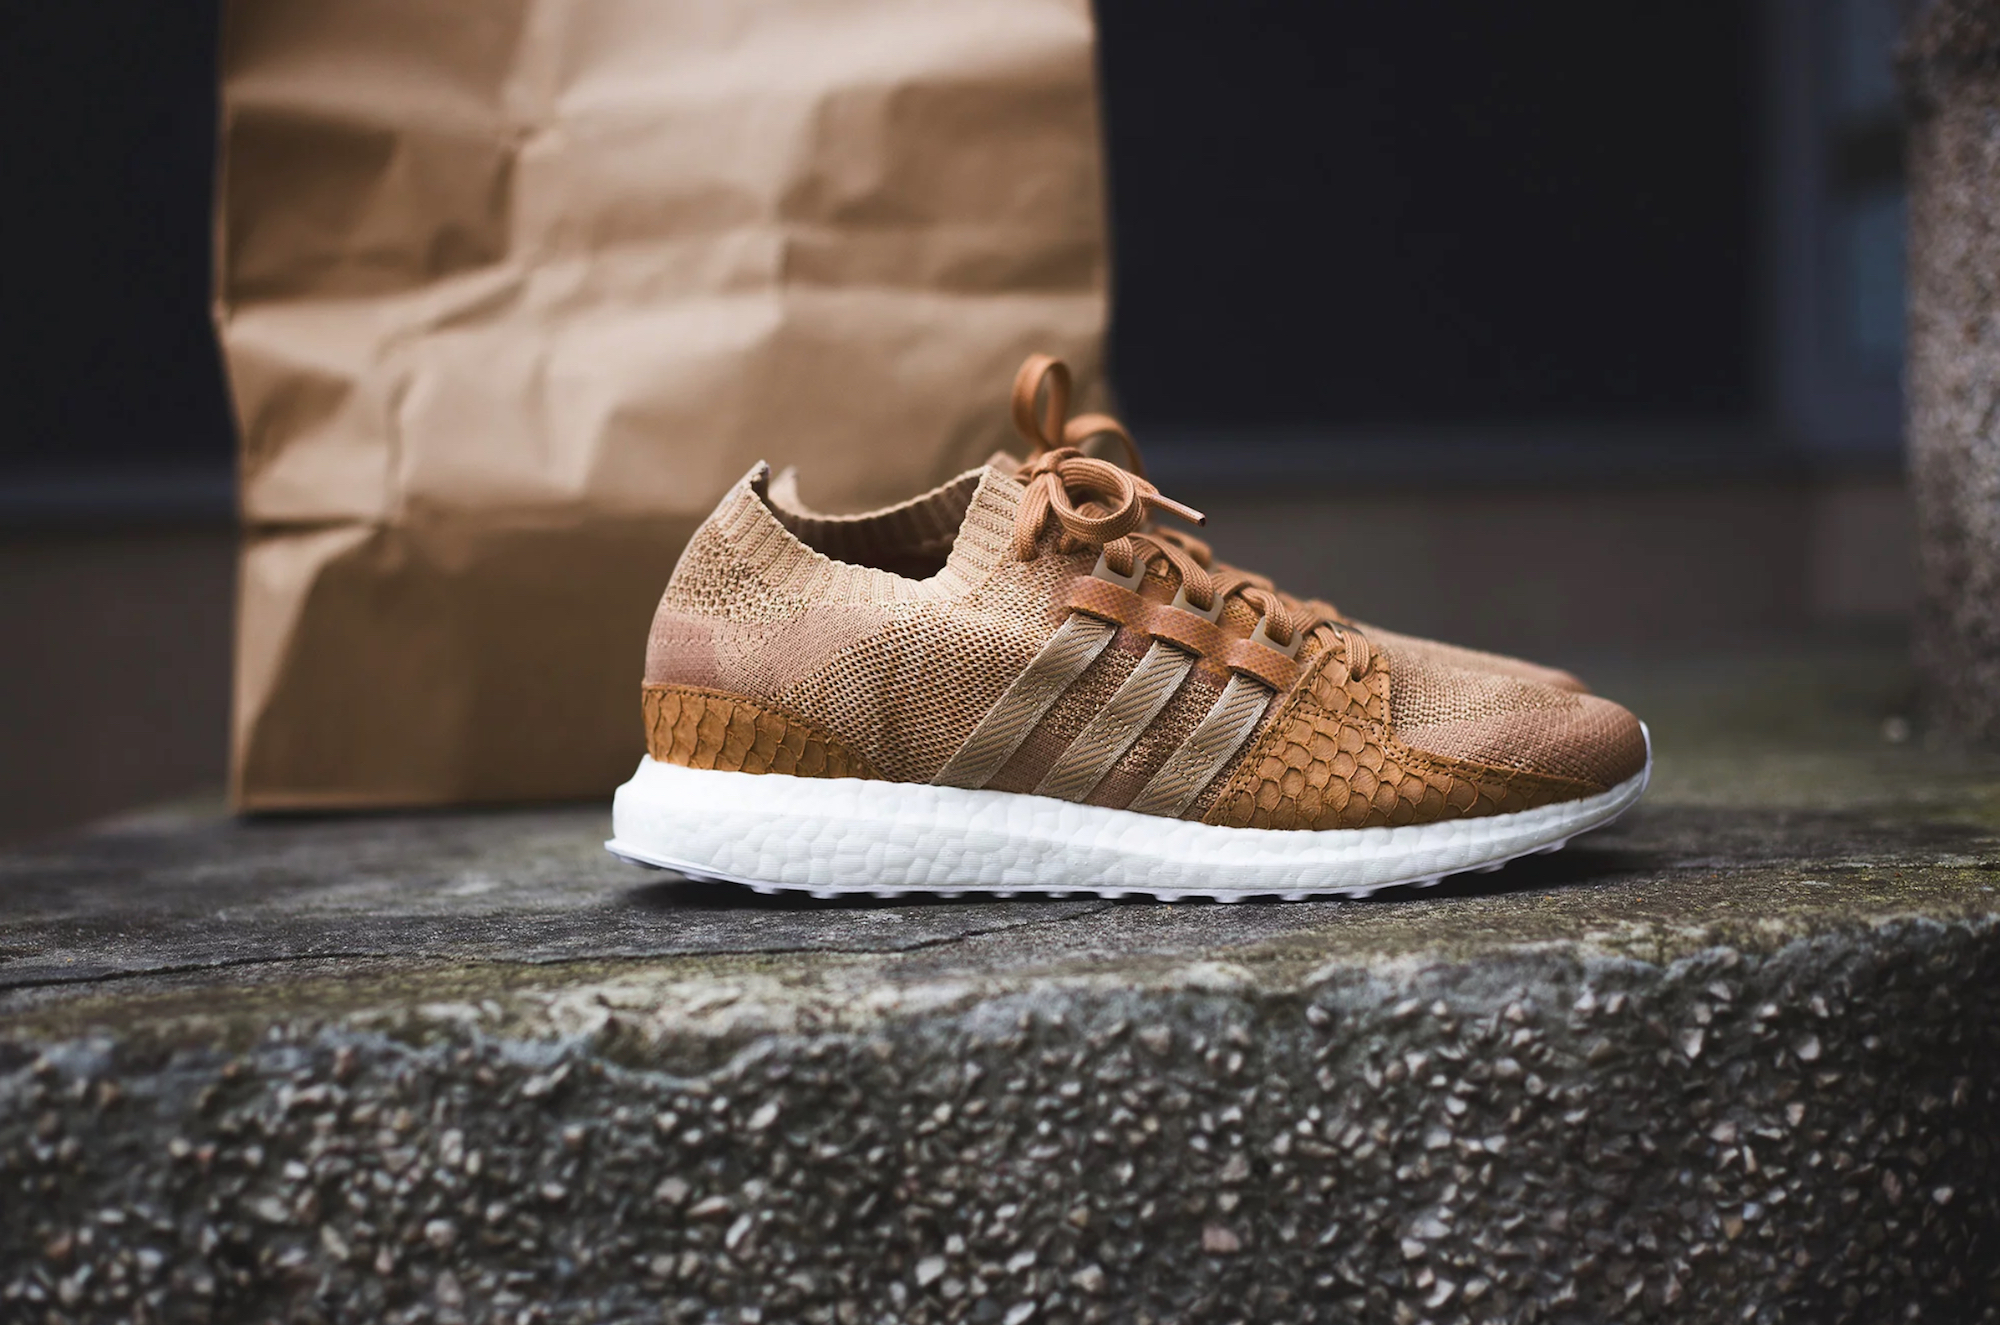 De stad salade logboek Here's a Better Look at the Pusha T x adidas Boost EQT 'Brown Paper Bag' -  WearTesters